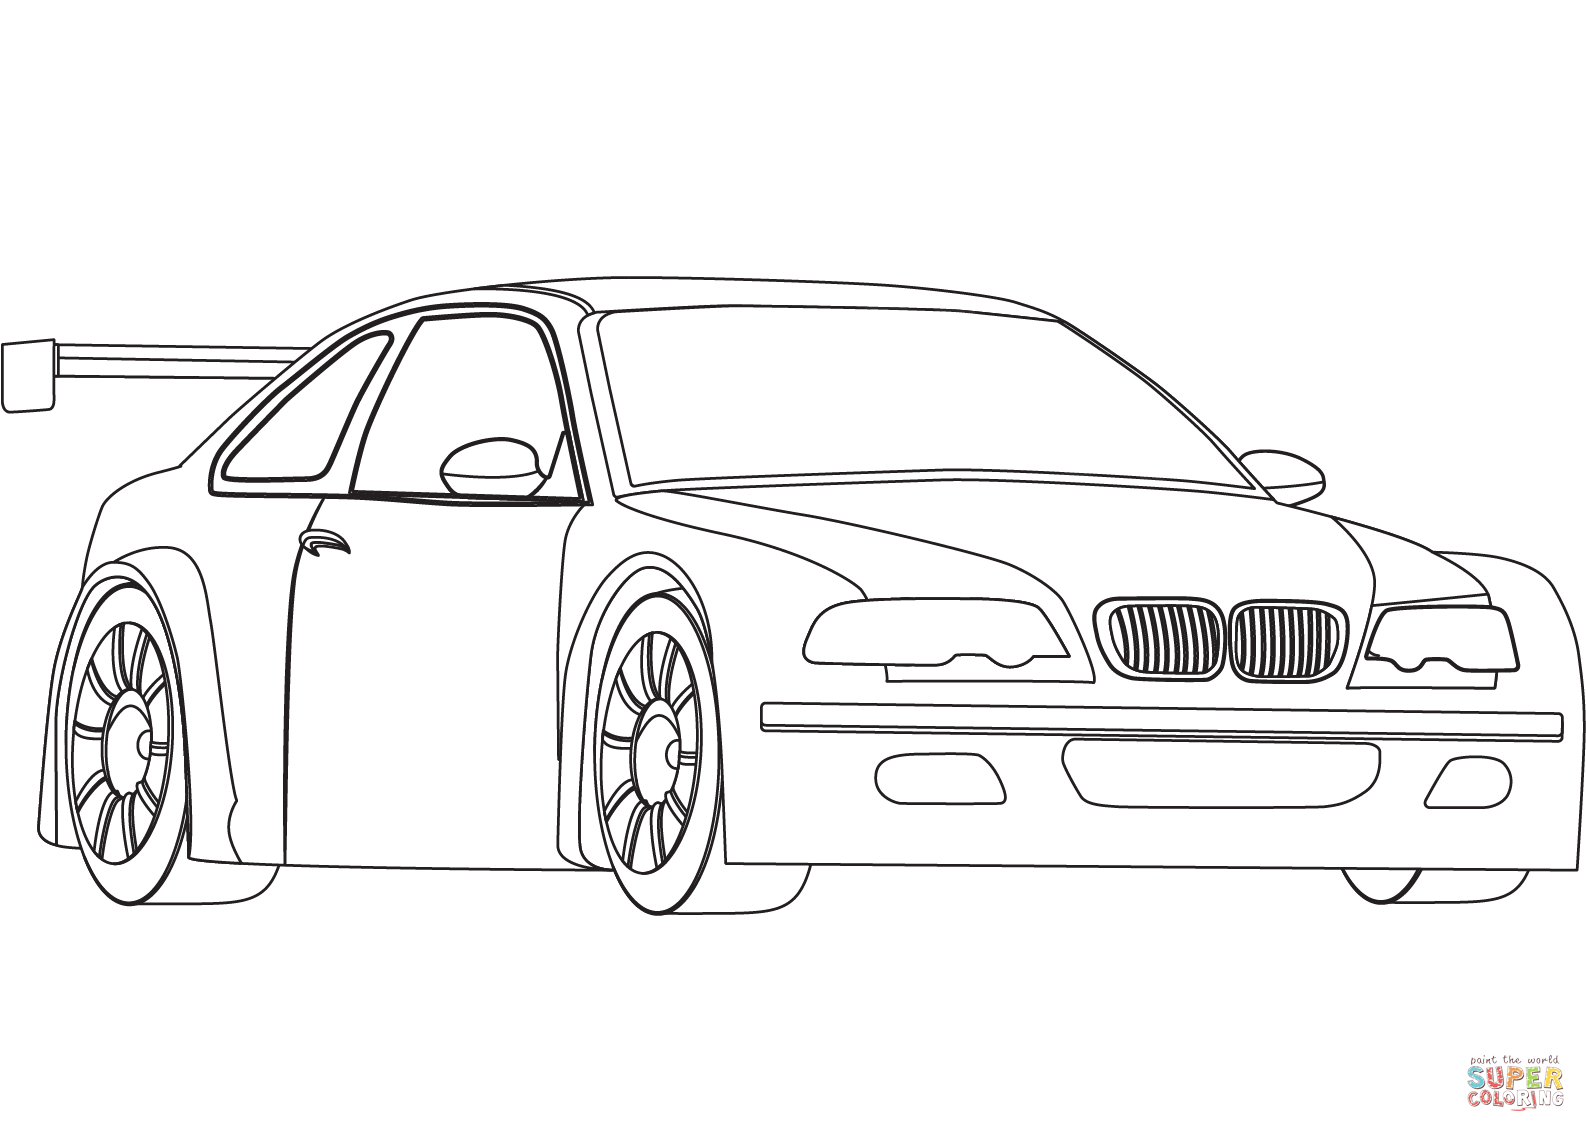 Bmw race car coloring page free printable coloring pages